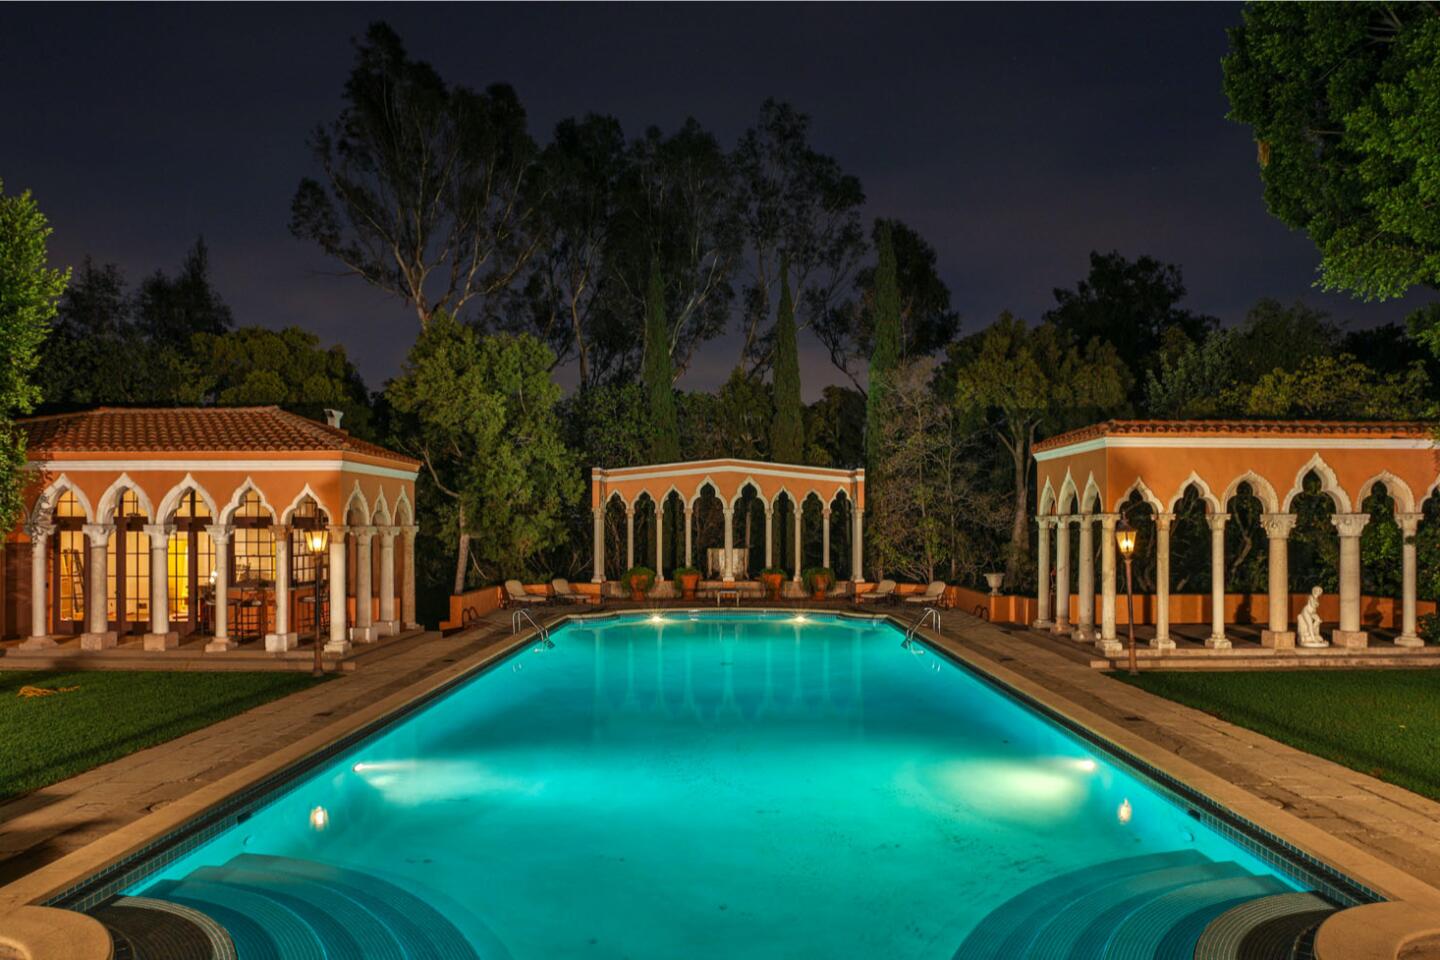 The pool house.